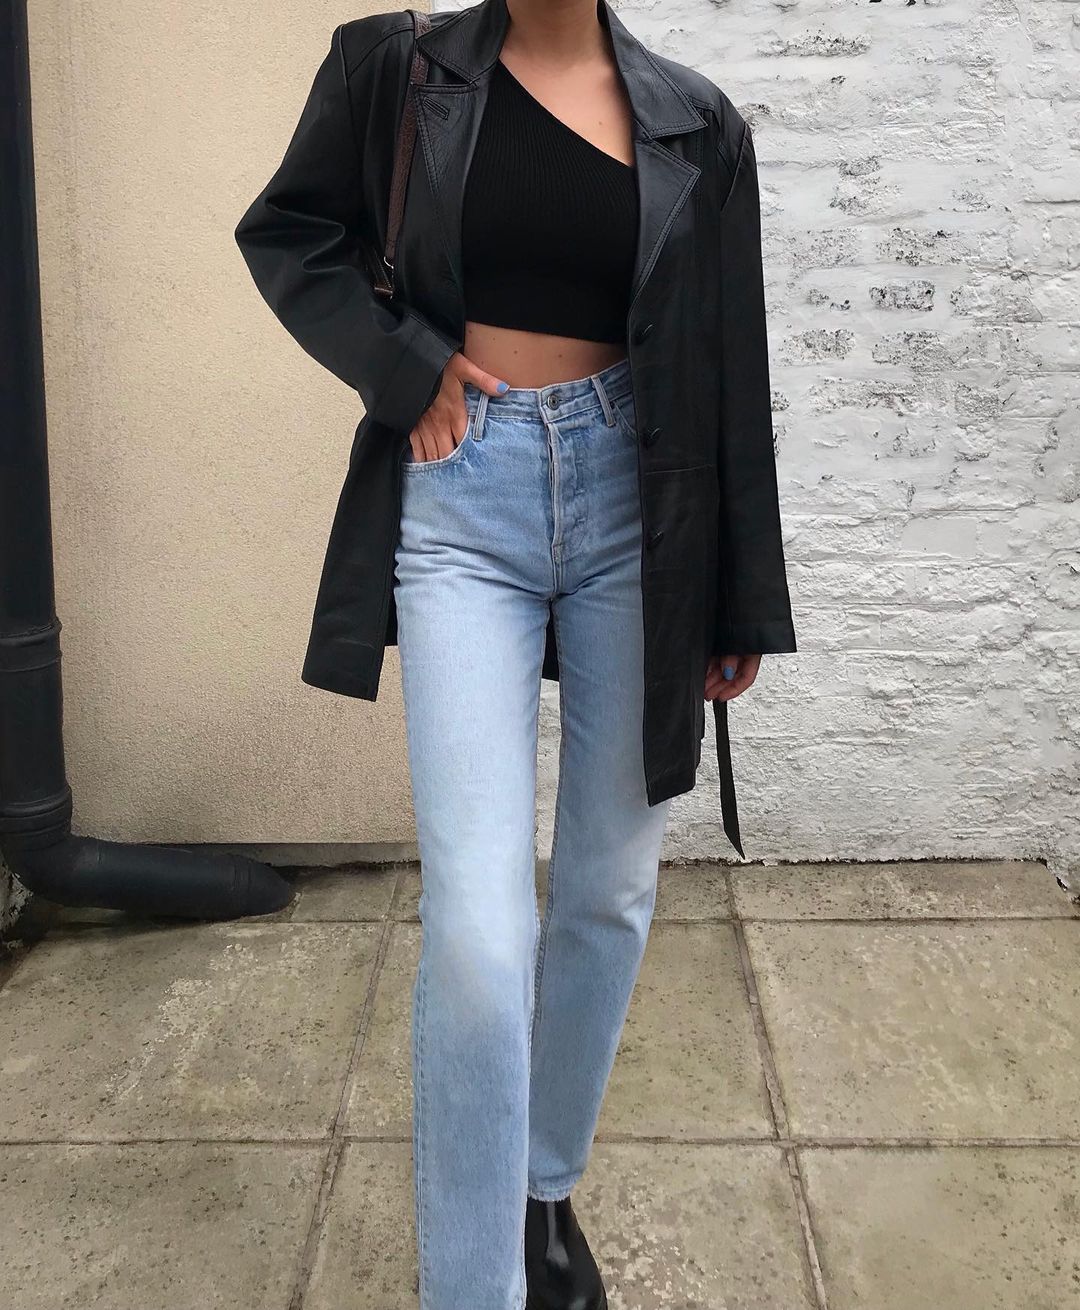 bra and blazer outfits: leather jacket with asymmetric crop top and jeans